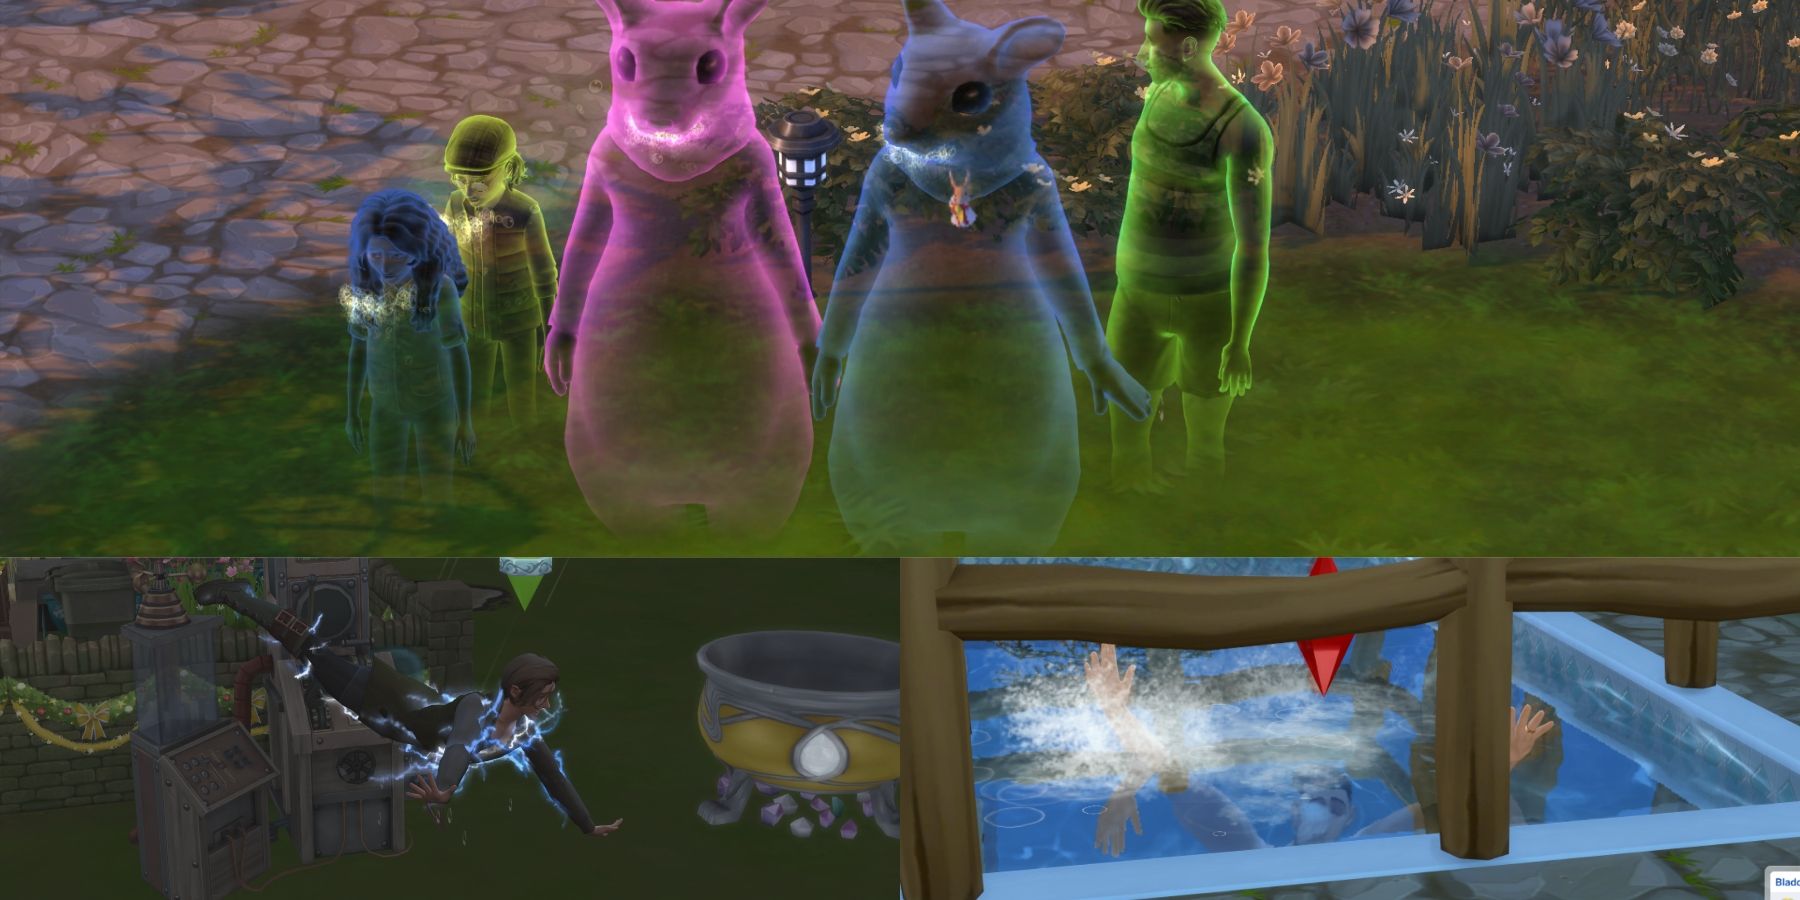 ghosts and a sim drowning and electrocuted in the sims 4